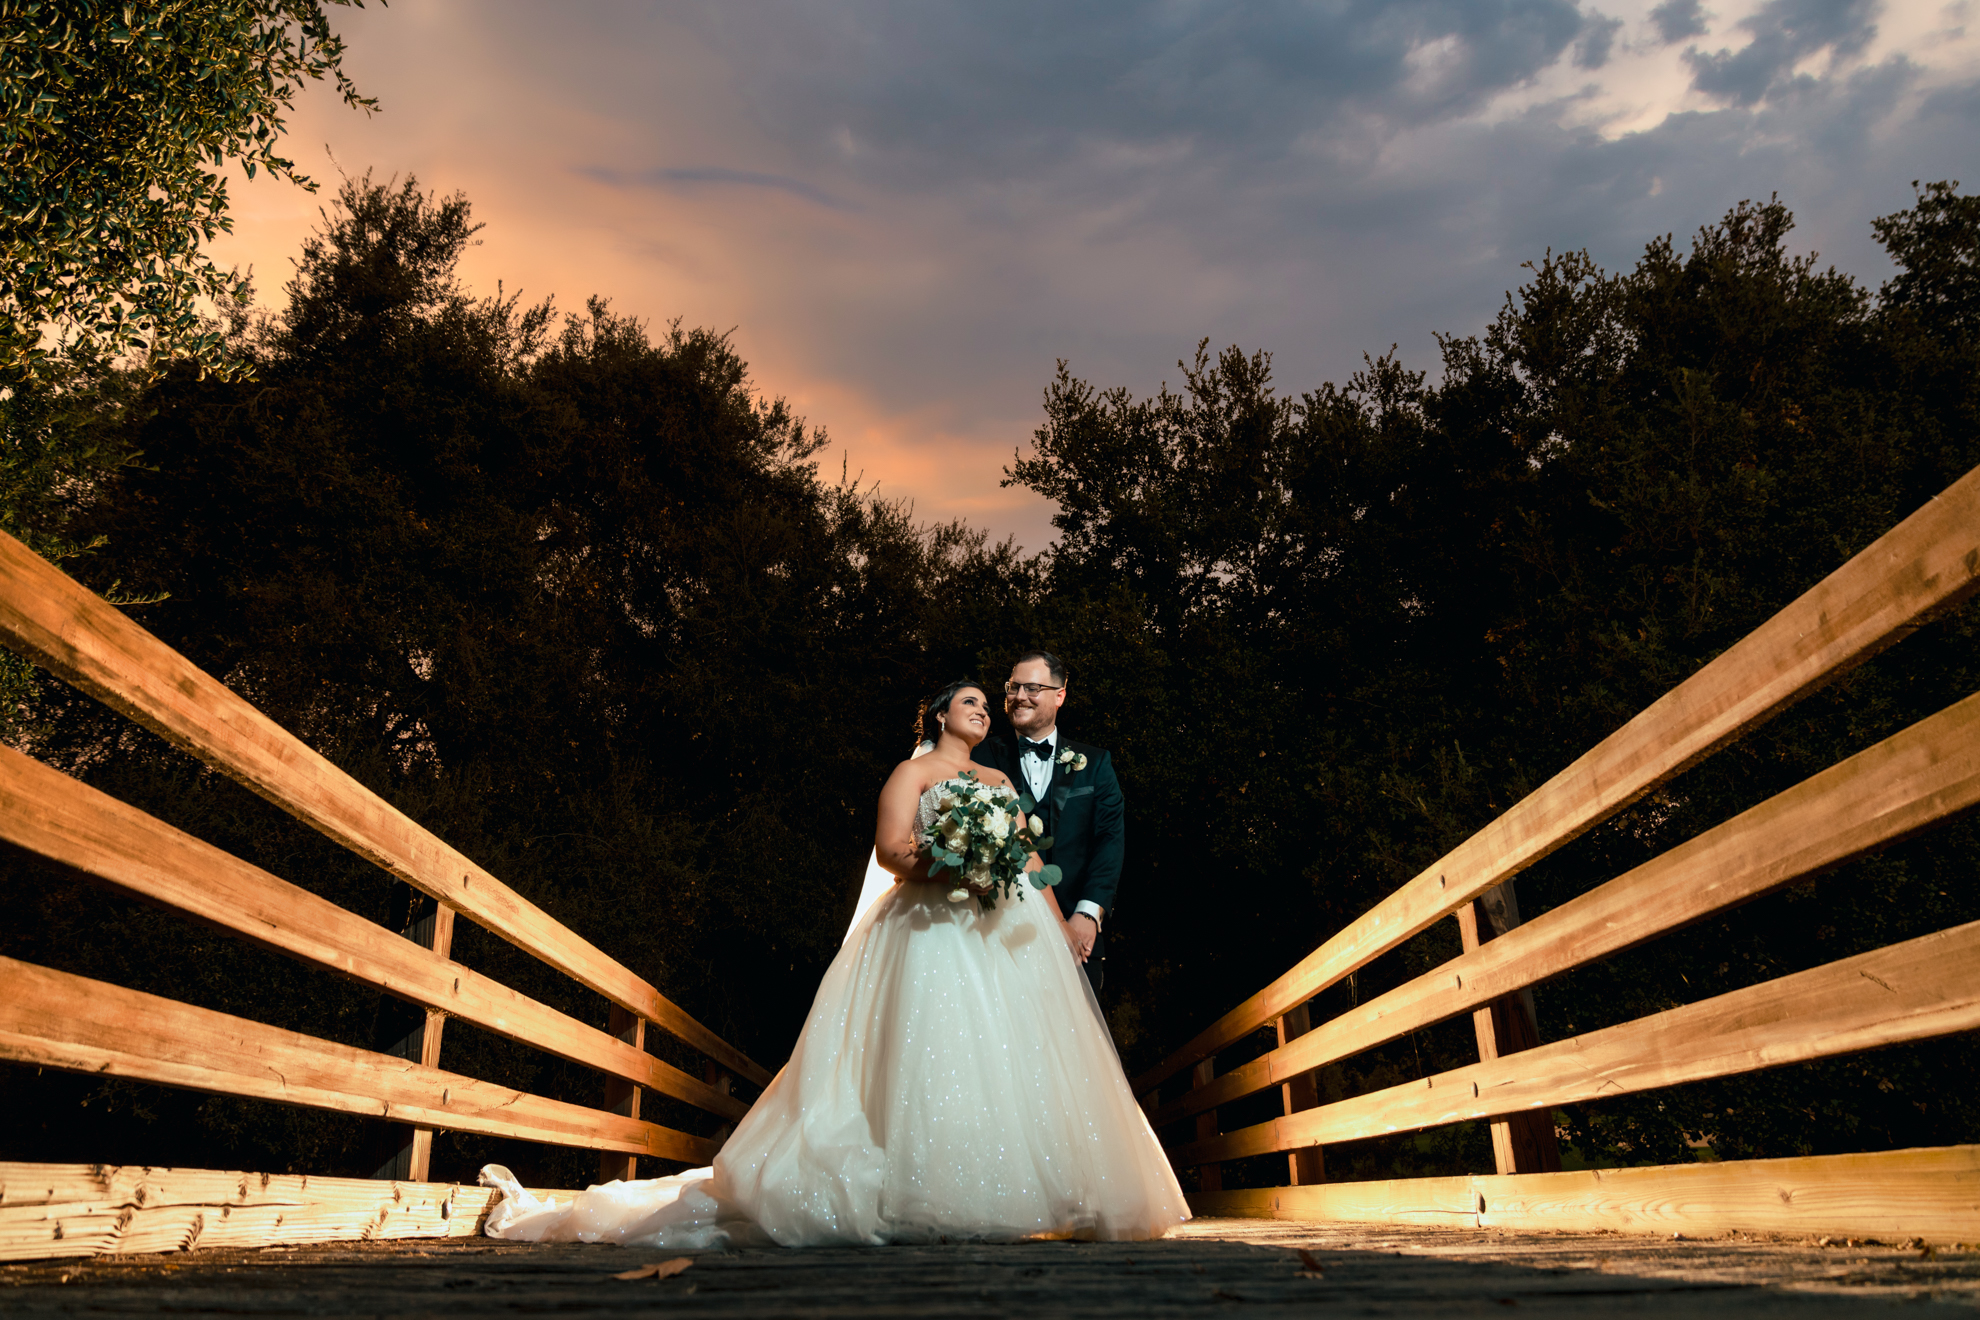 ThomasKim_photography J & M, a bride and groom, standing on a bridge at sunset.